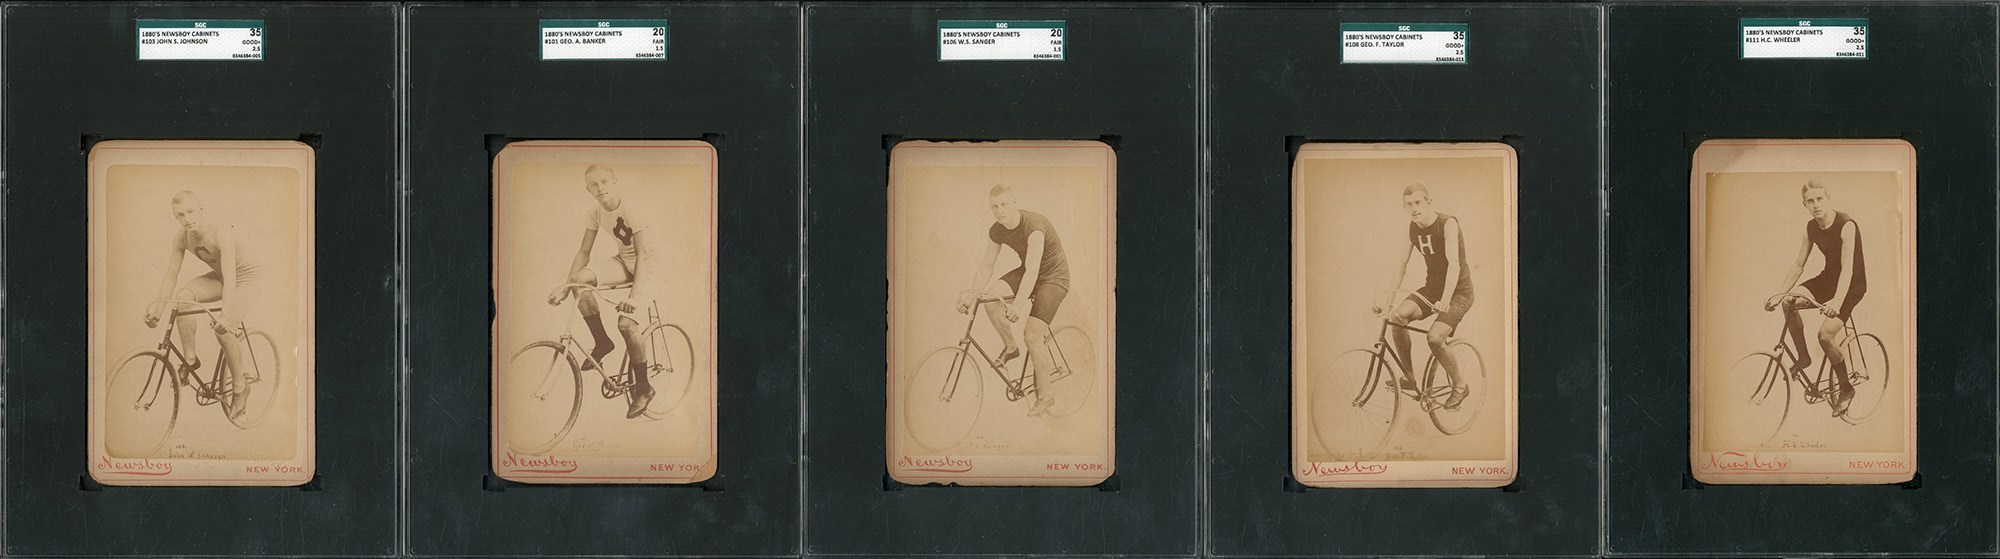 Baseball and Trading Cards - 1880s Newsboy Cabinets Collection of 5 Cyclists - All SGC Graded